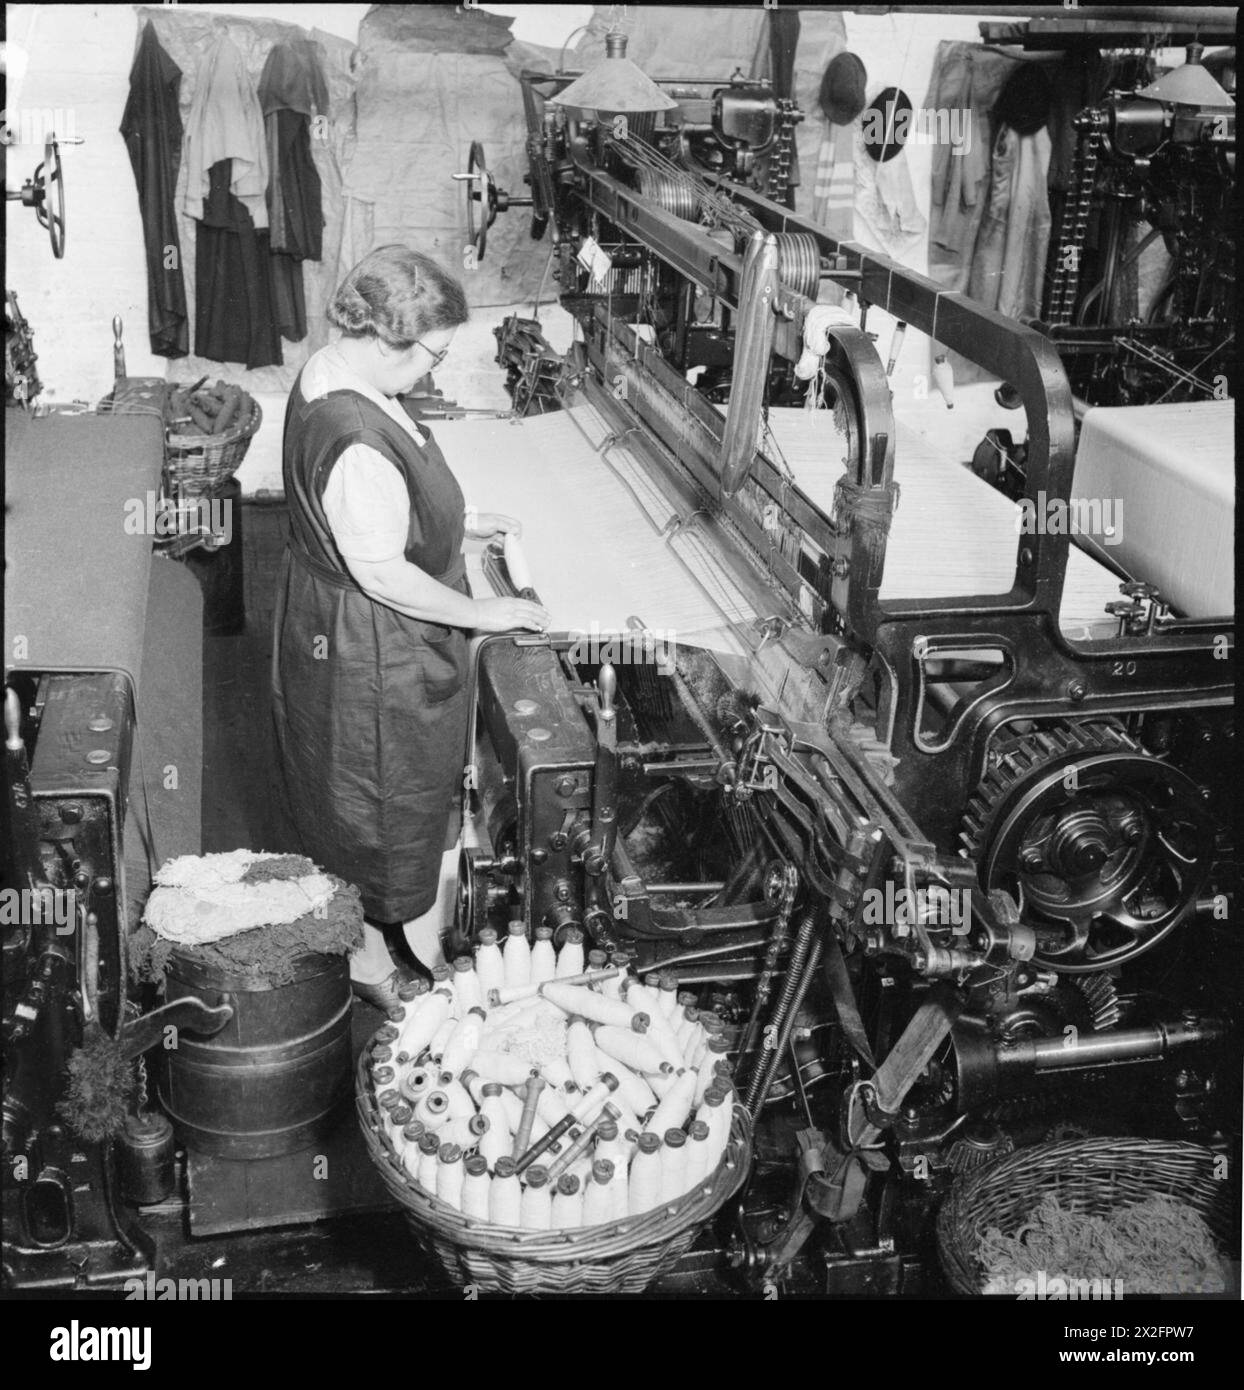 OLD RAGS INTO NEW CLOTH: SALVAGE IN BRITAIN, APRIL 1942 - A mill girl works at a loom in at textile mill, somewhere in Britain. The weaving loom intertwines separate threads of warp and weft to produce woollen cloth. The warp is the thread which runs lengthways in the machine, with the weft being shuttled back and forth through it. The mill worker pictured here is putting the weft bobbin into the shuttle of the loom. A large basket of bobbins can be seen beside her Stock Photo